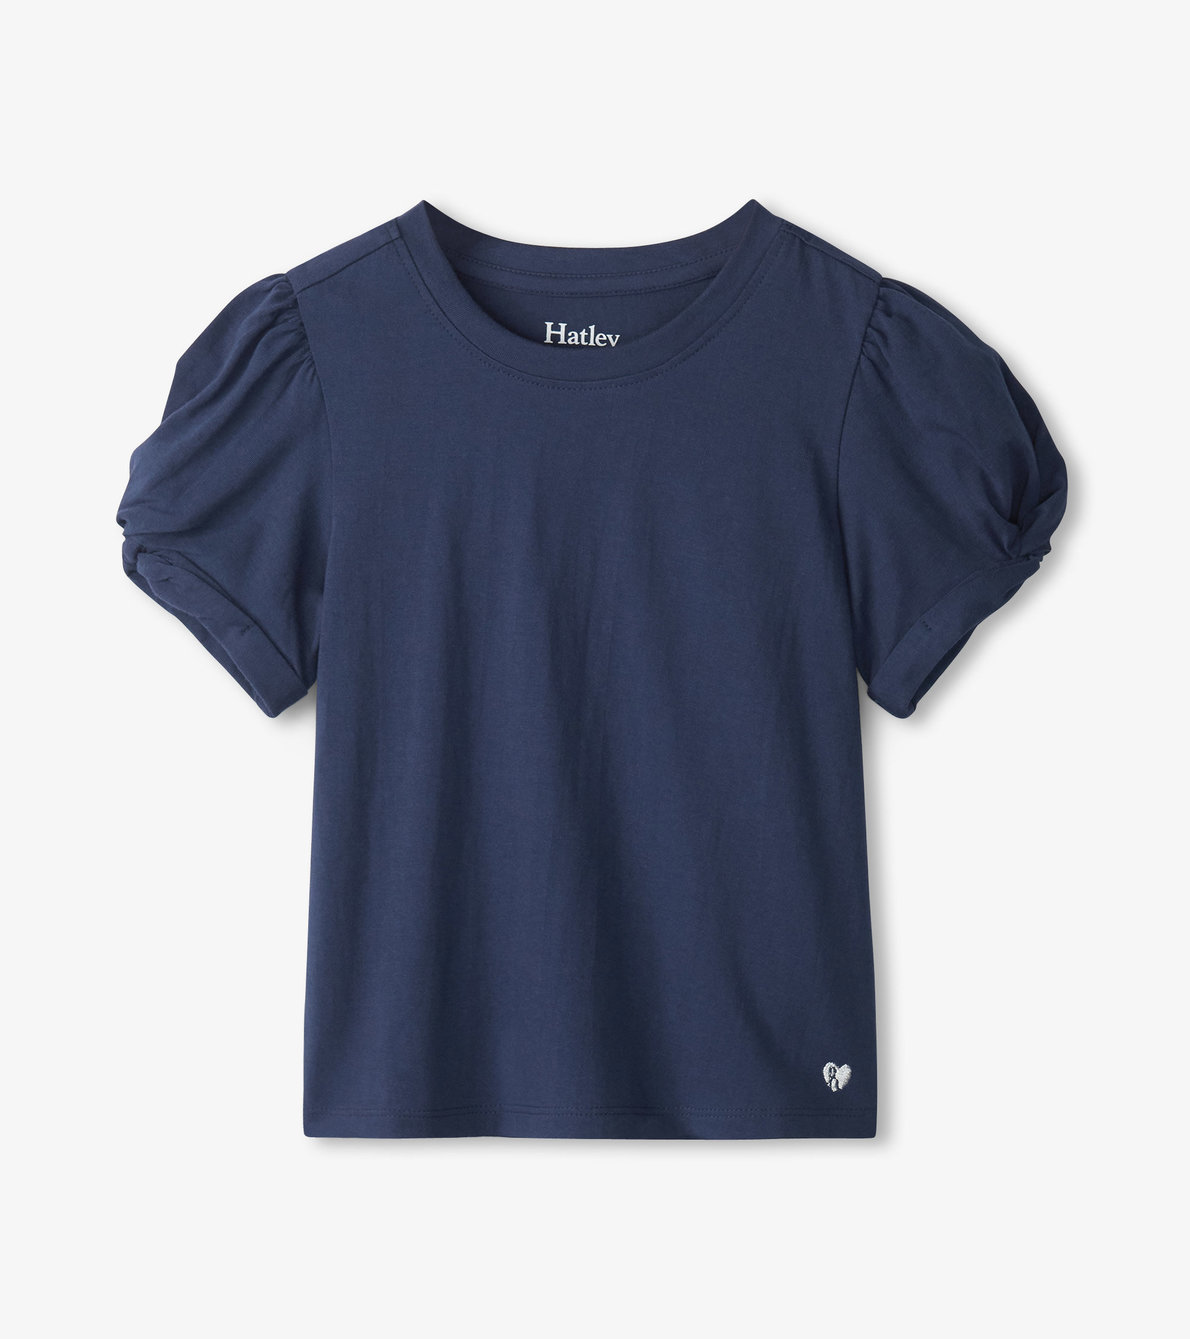 View larger image of Girls Navy Twisted Sleeve Tee